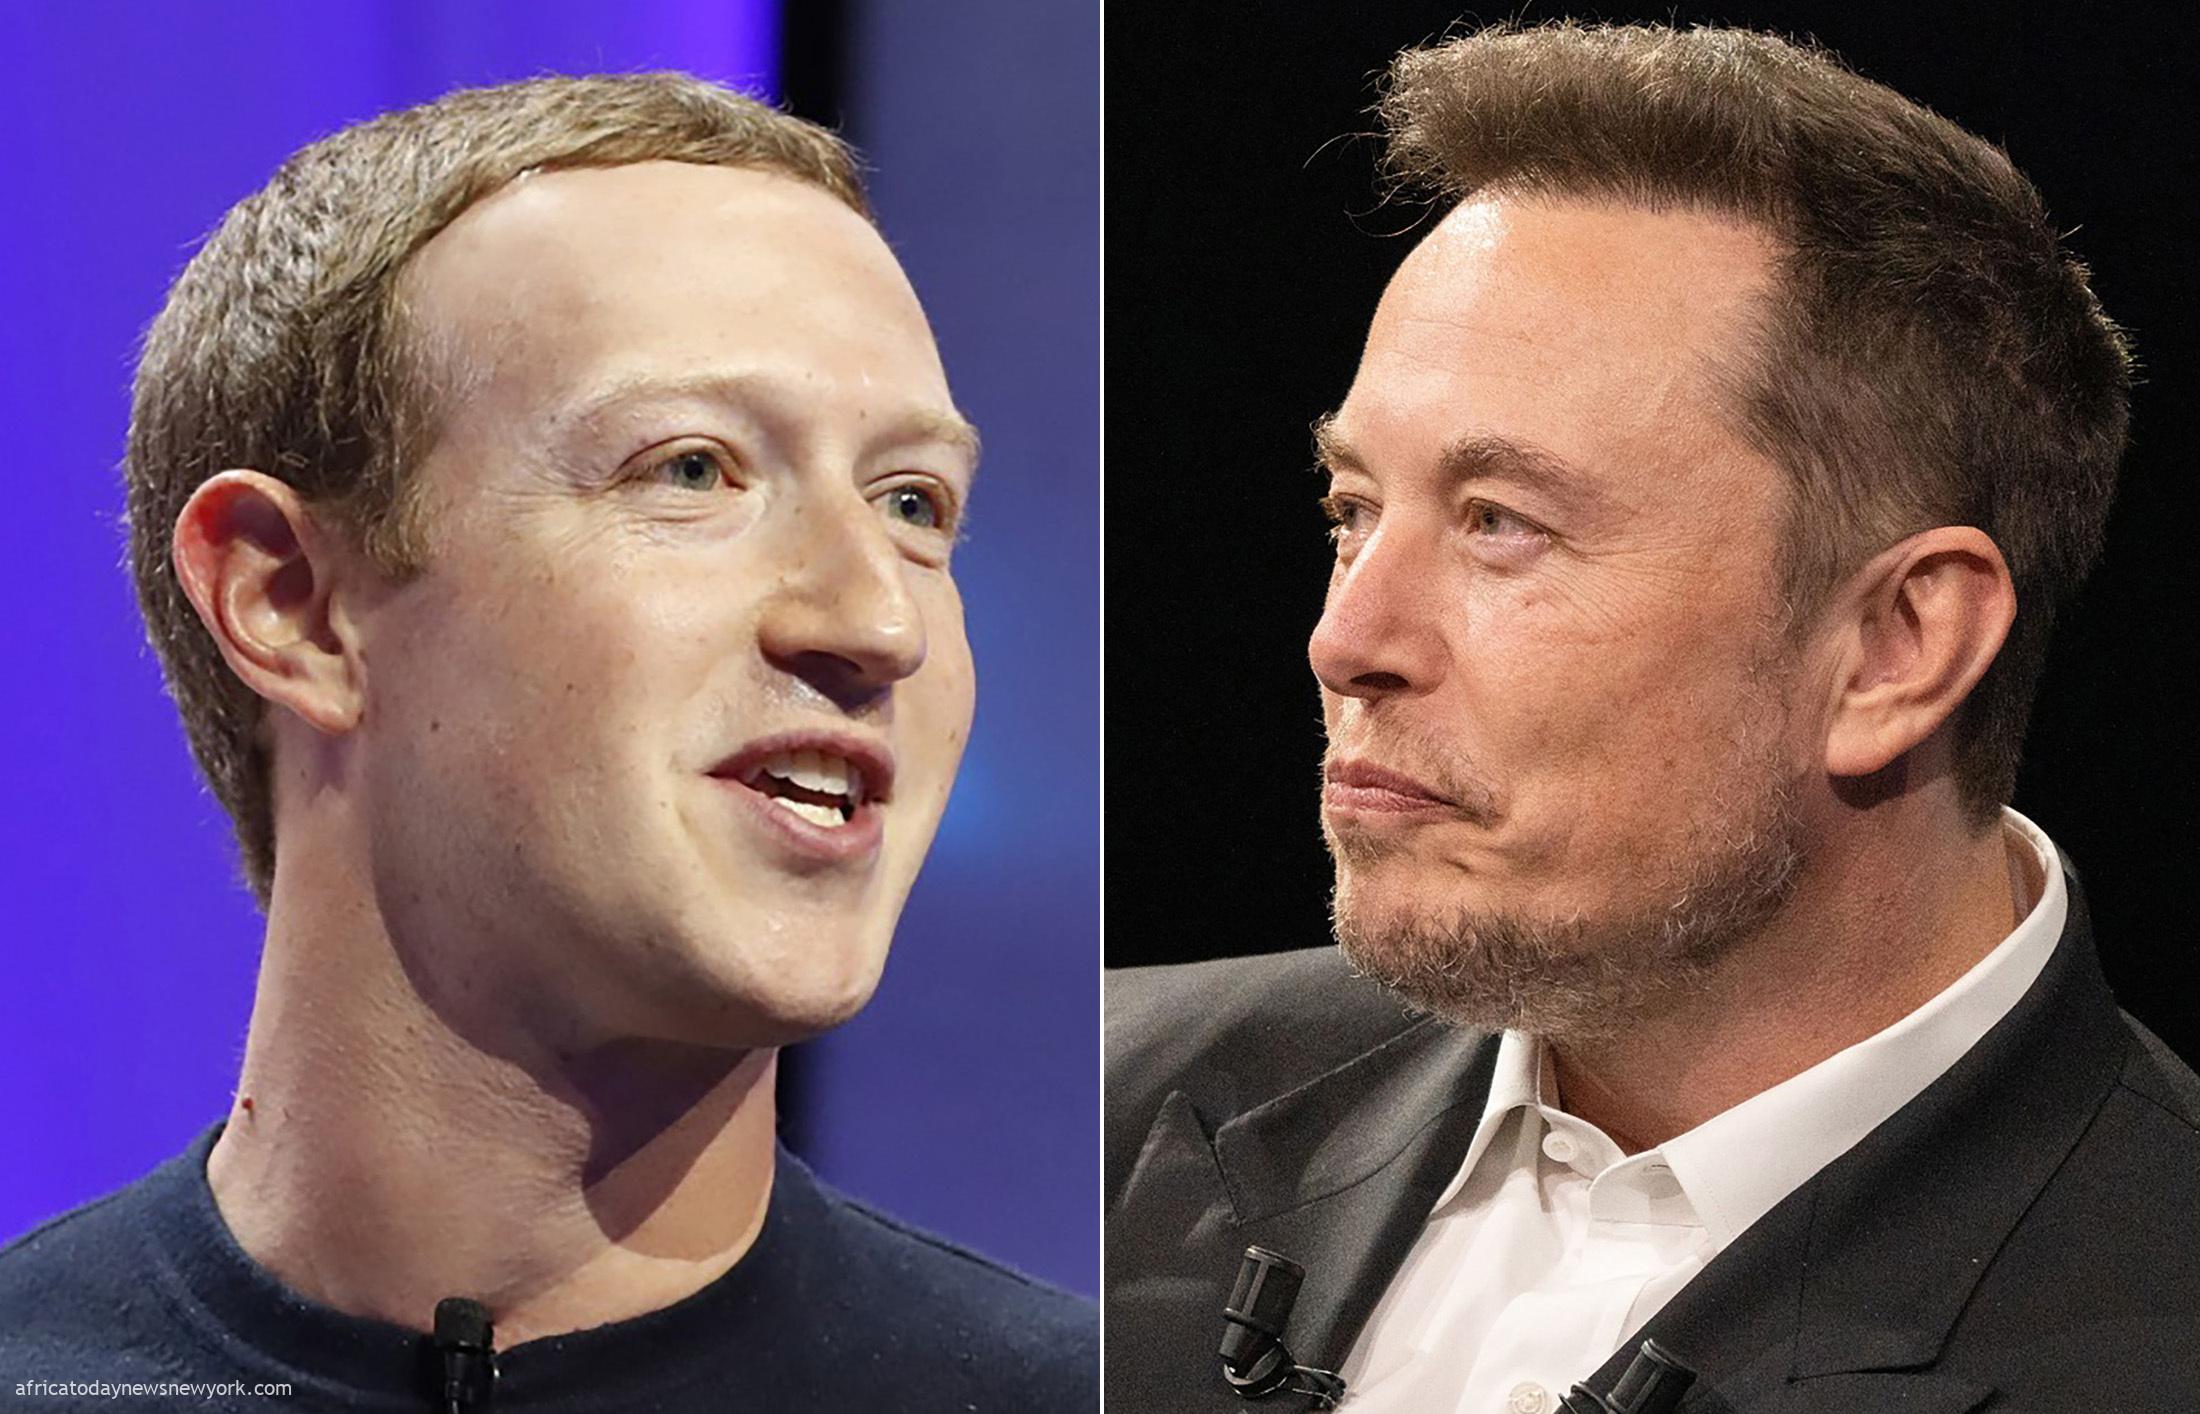 Cage Fight Musk Not Serious, Time To Move On – Zuckerberg